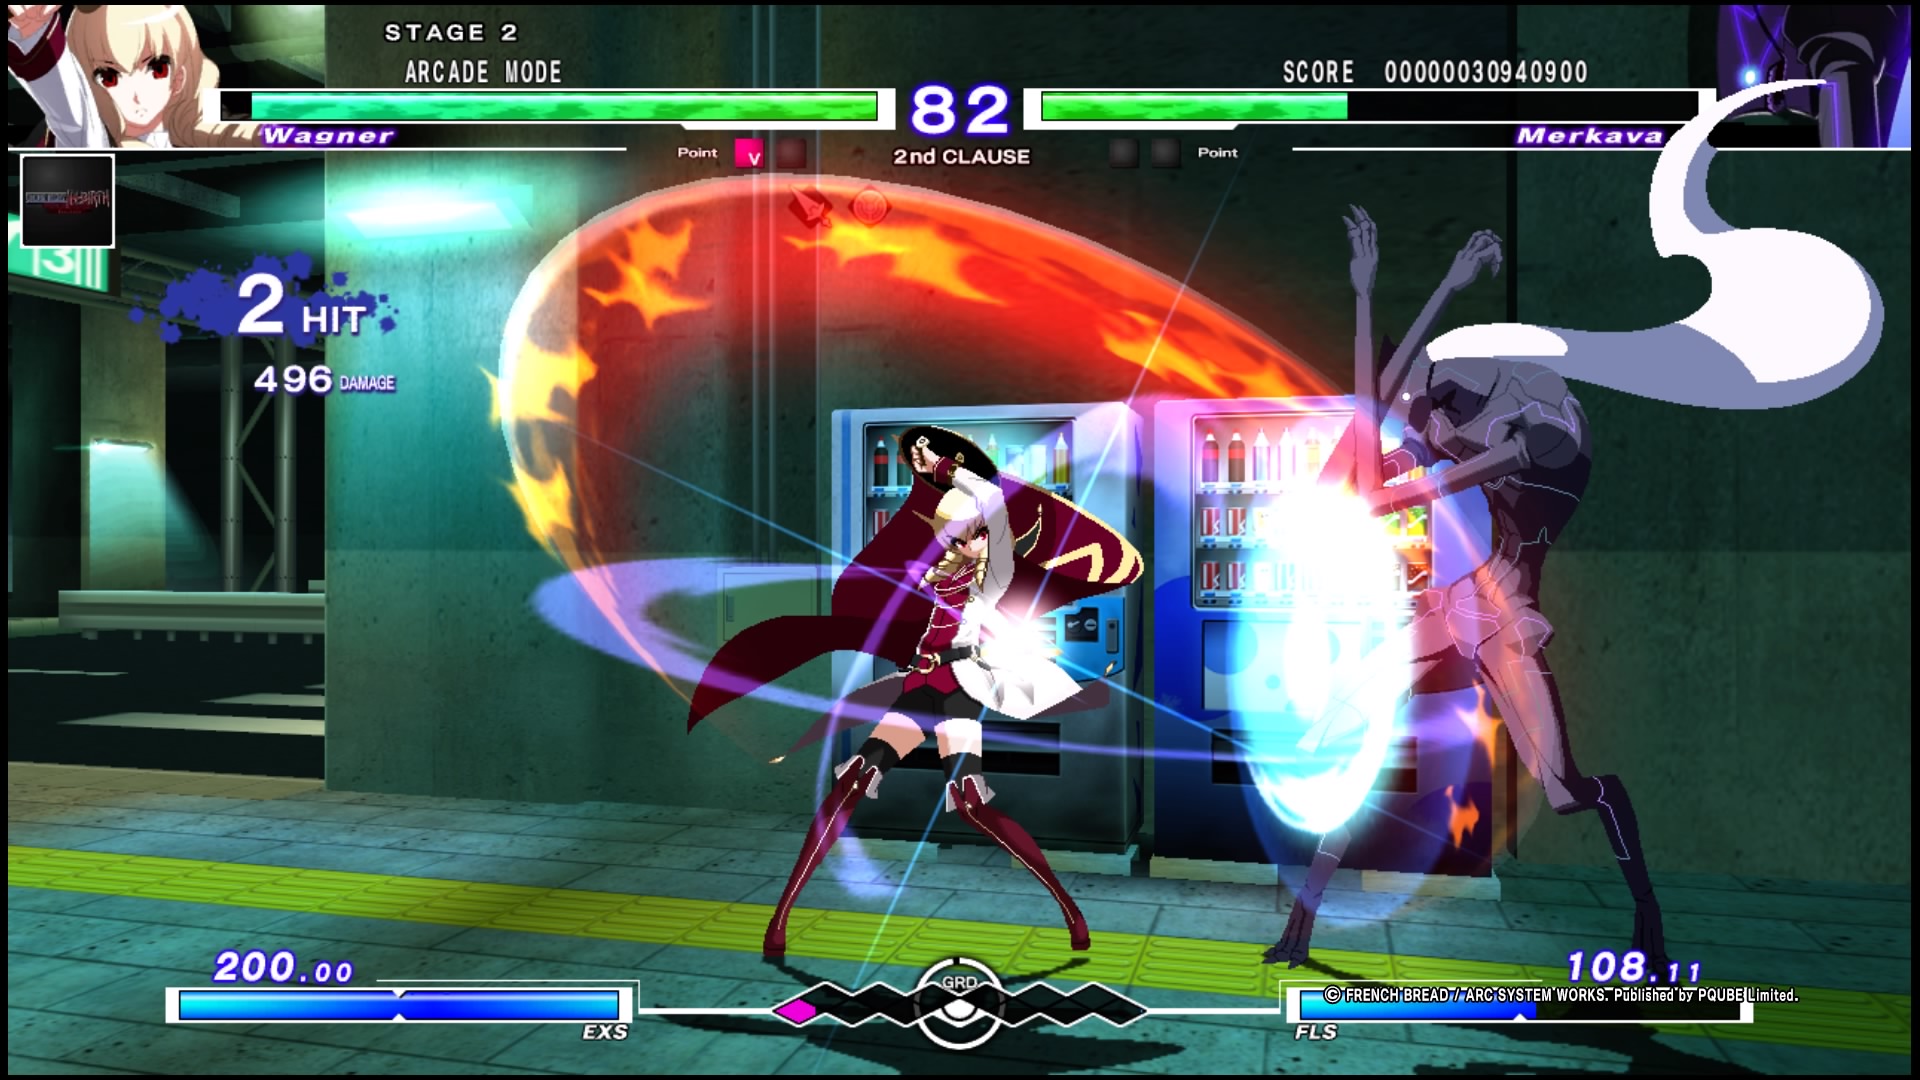 Under night in-birth exe : late[cl-r]